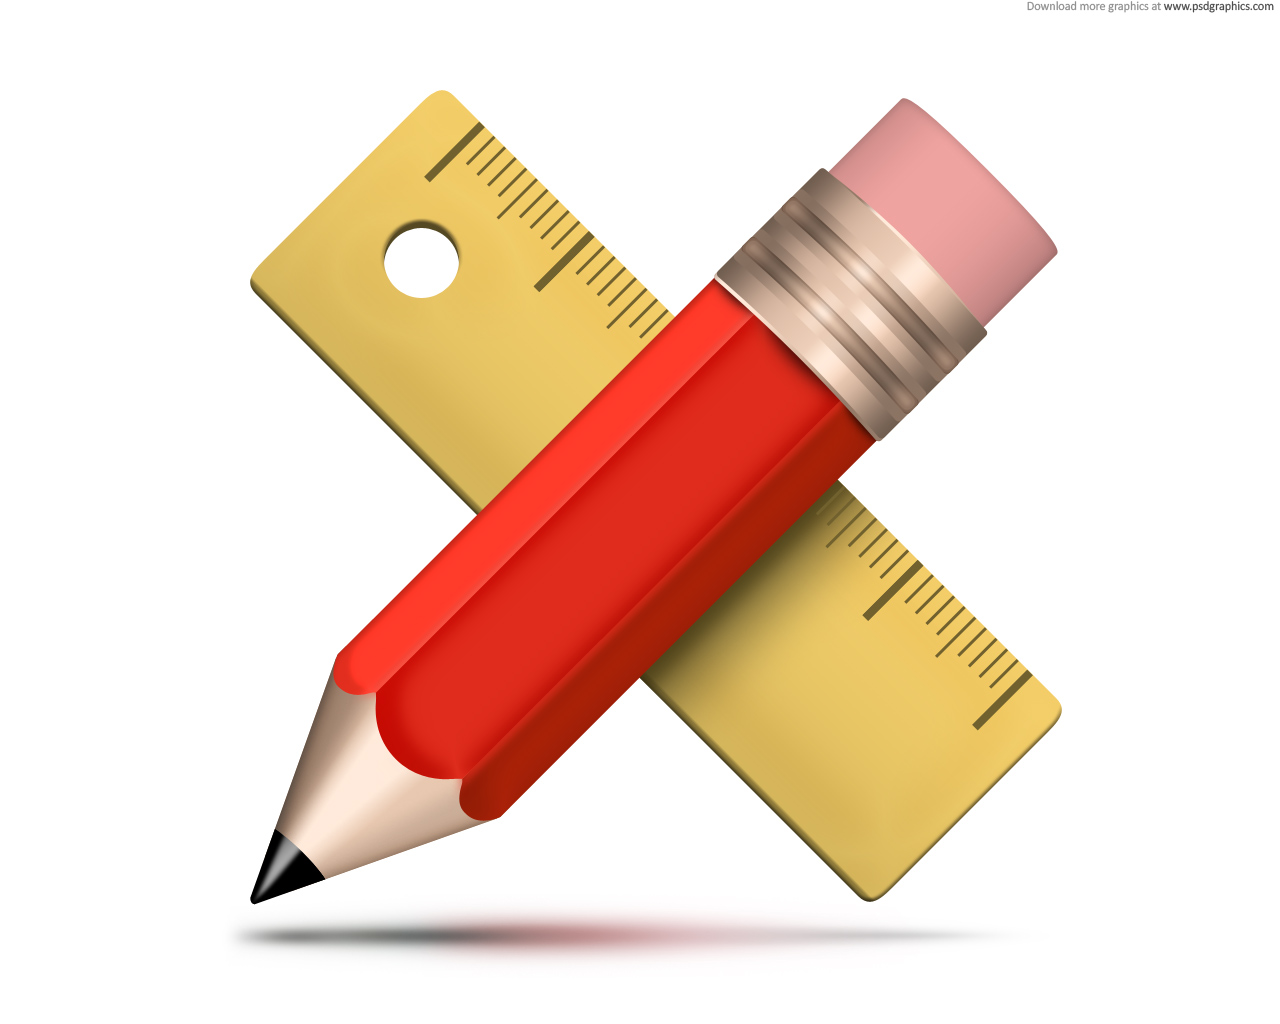 Quill pen and inkwell icon (PSD) | PSDGraphics